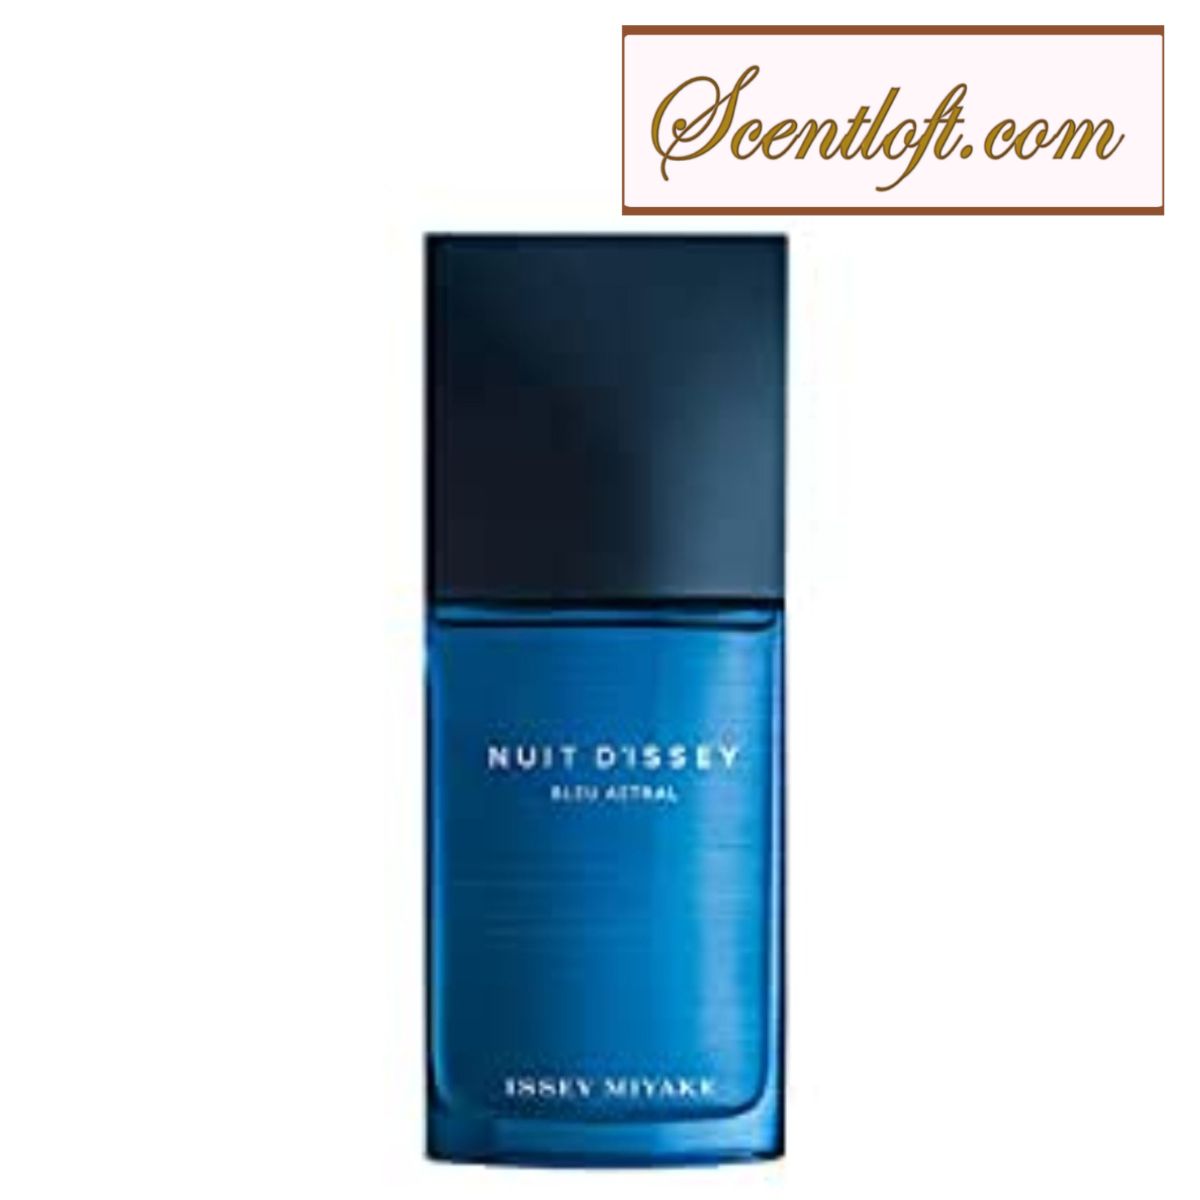 Issey Miyake Nuit D'Isey Bleu Astral EDT 75ml *